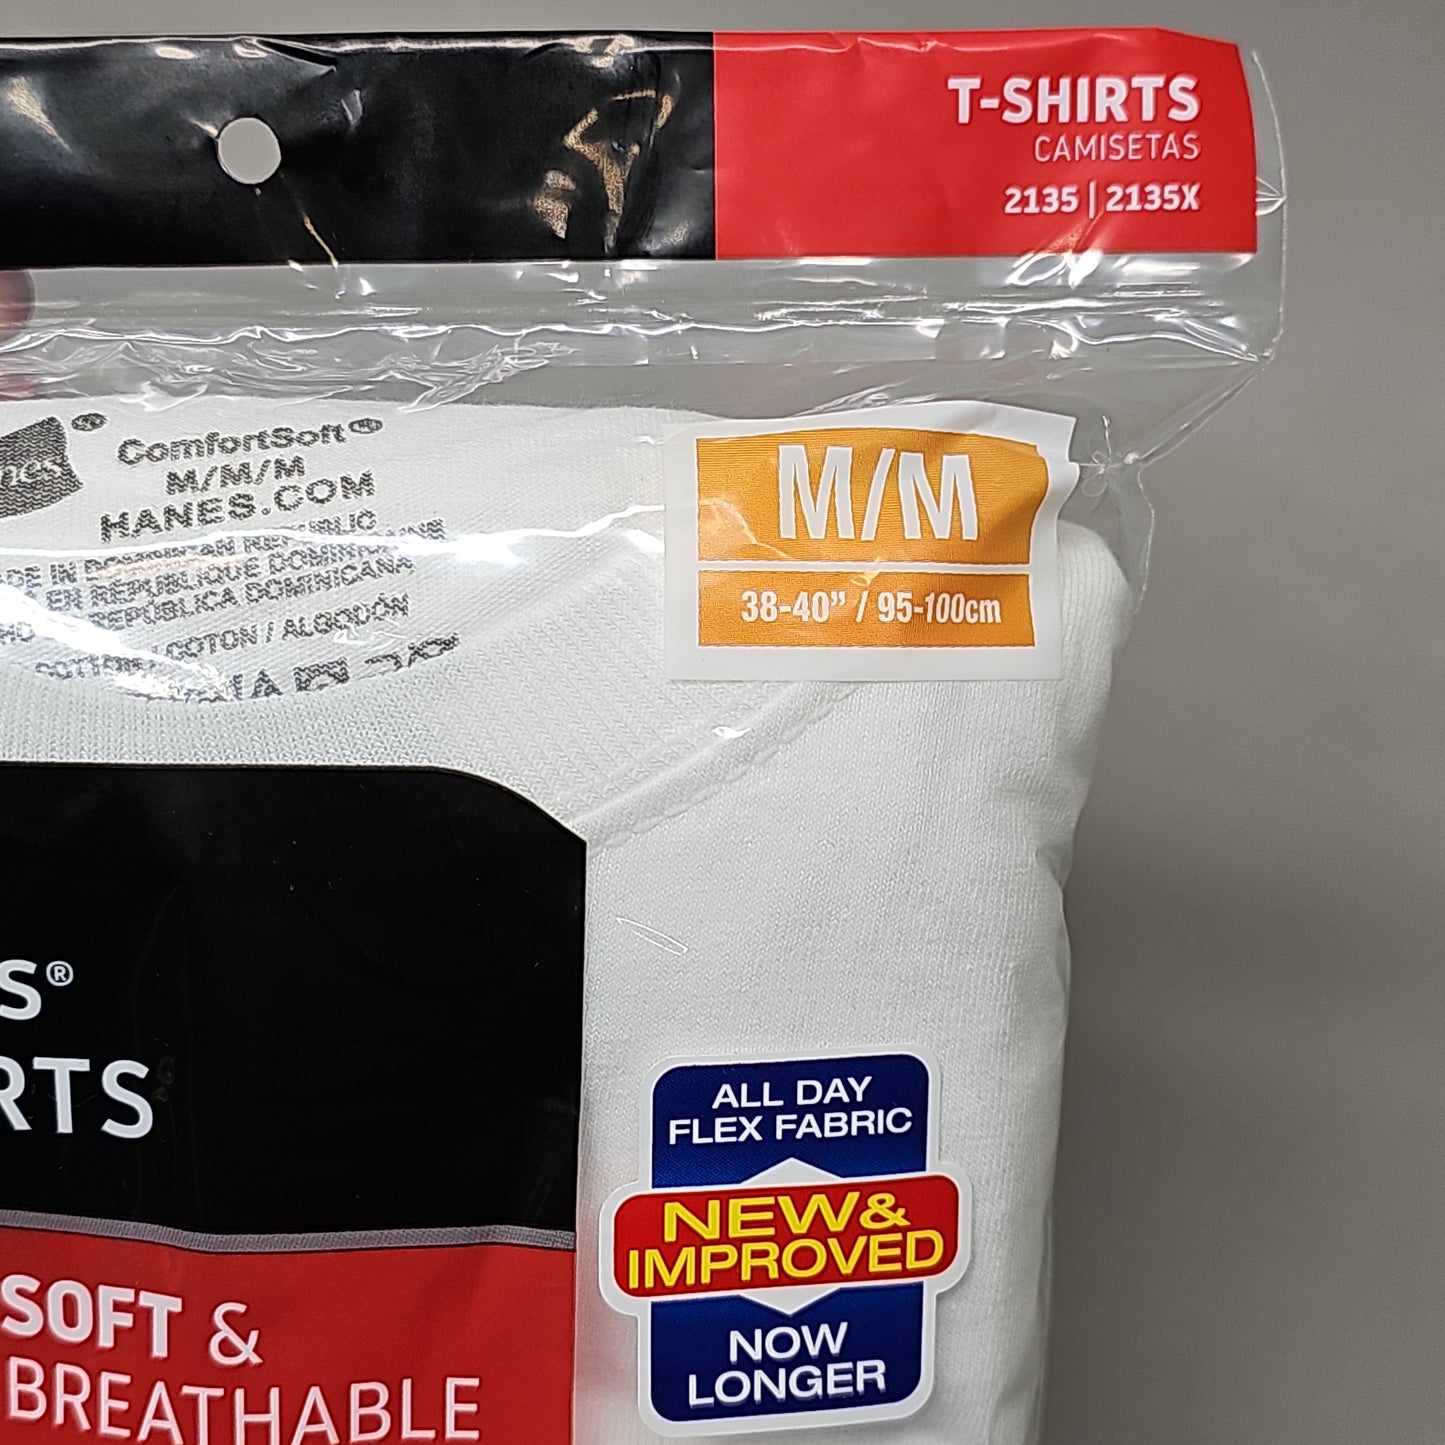 HANES Tagless T-Shirts Pack of 3 Men's Size M 38-40" White #2135 (New)